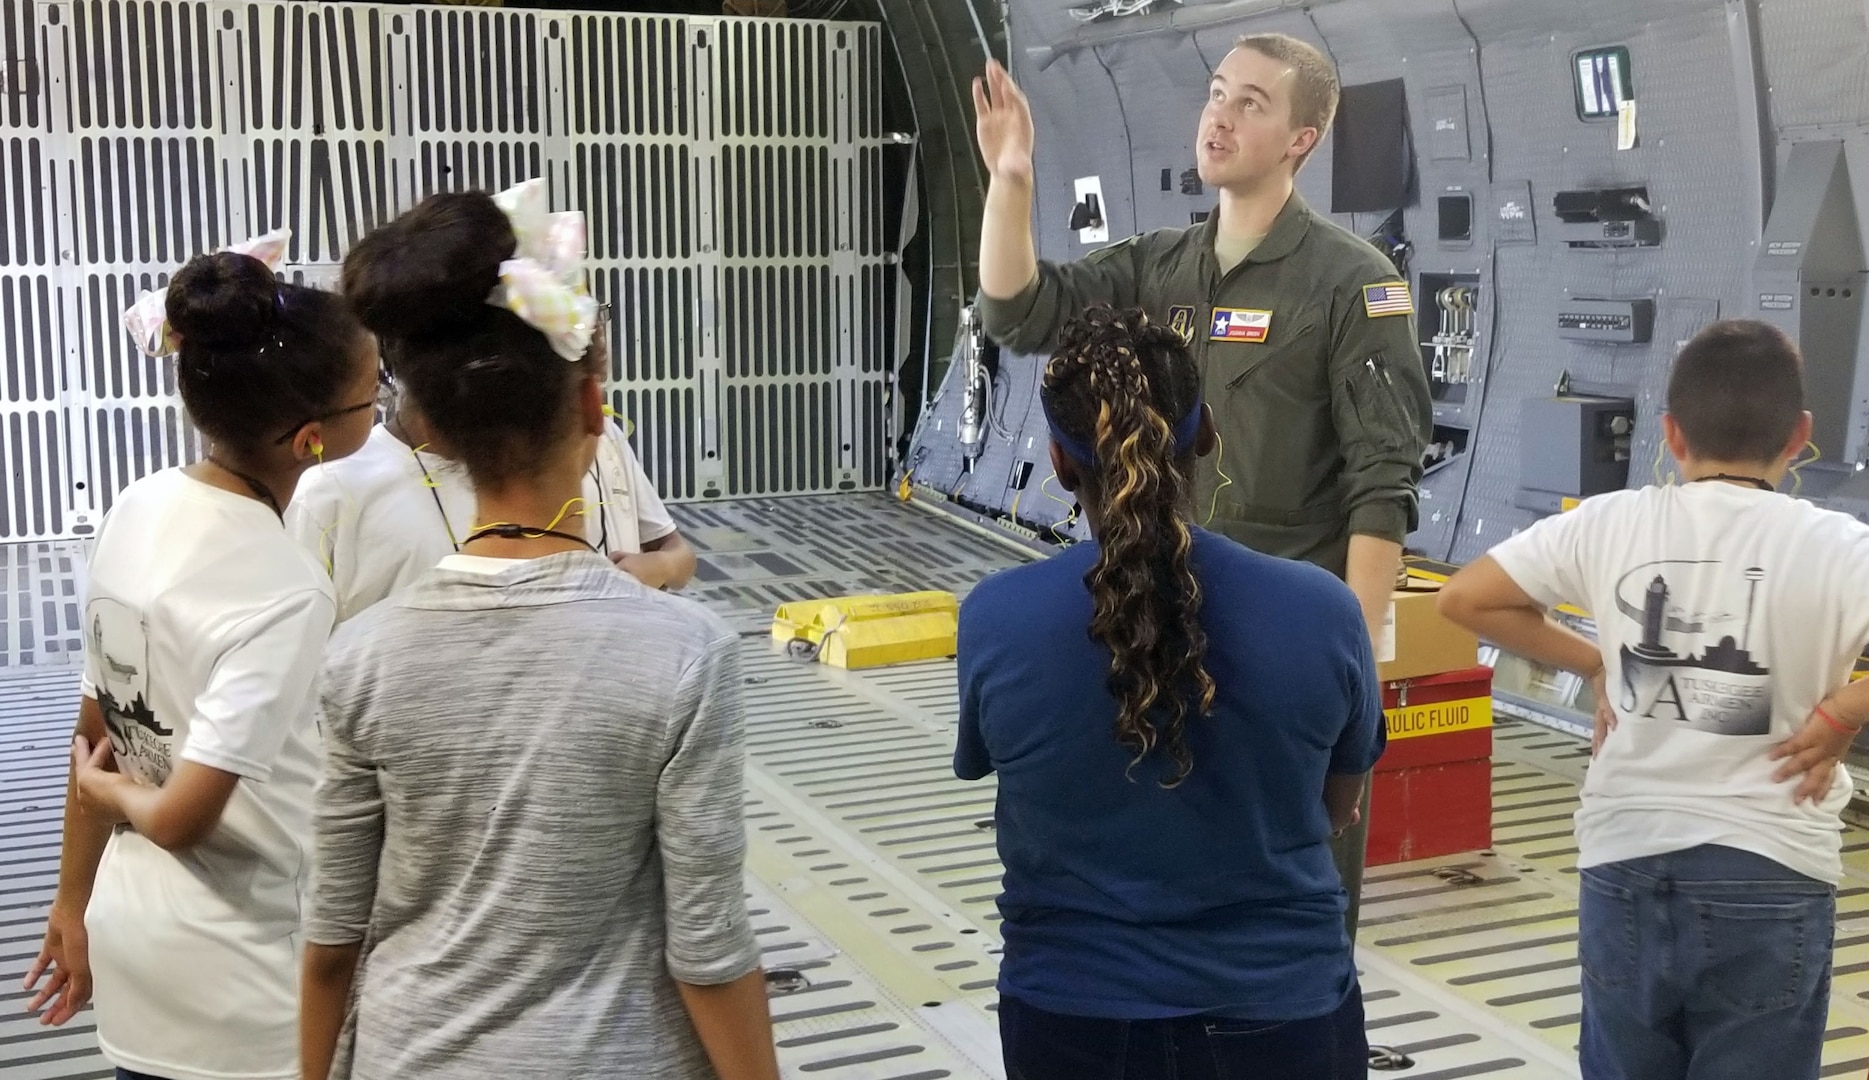 Tech. Sgt. Joshua Green, 356th Airlift Squadron loadmaster, describes the C-5M Super Galaxy’s cargo compartment to students with the San Antonio Chapter of Tuskegee Airmen Inc.’s Youth Science, Technology, Engineering and Mathematics-Aviation Program at Joint Base San Antonio-Lackland July 12.